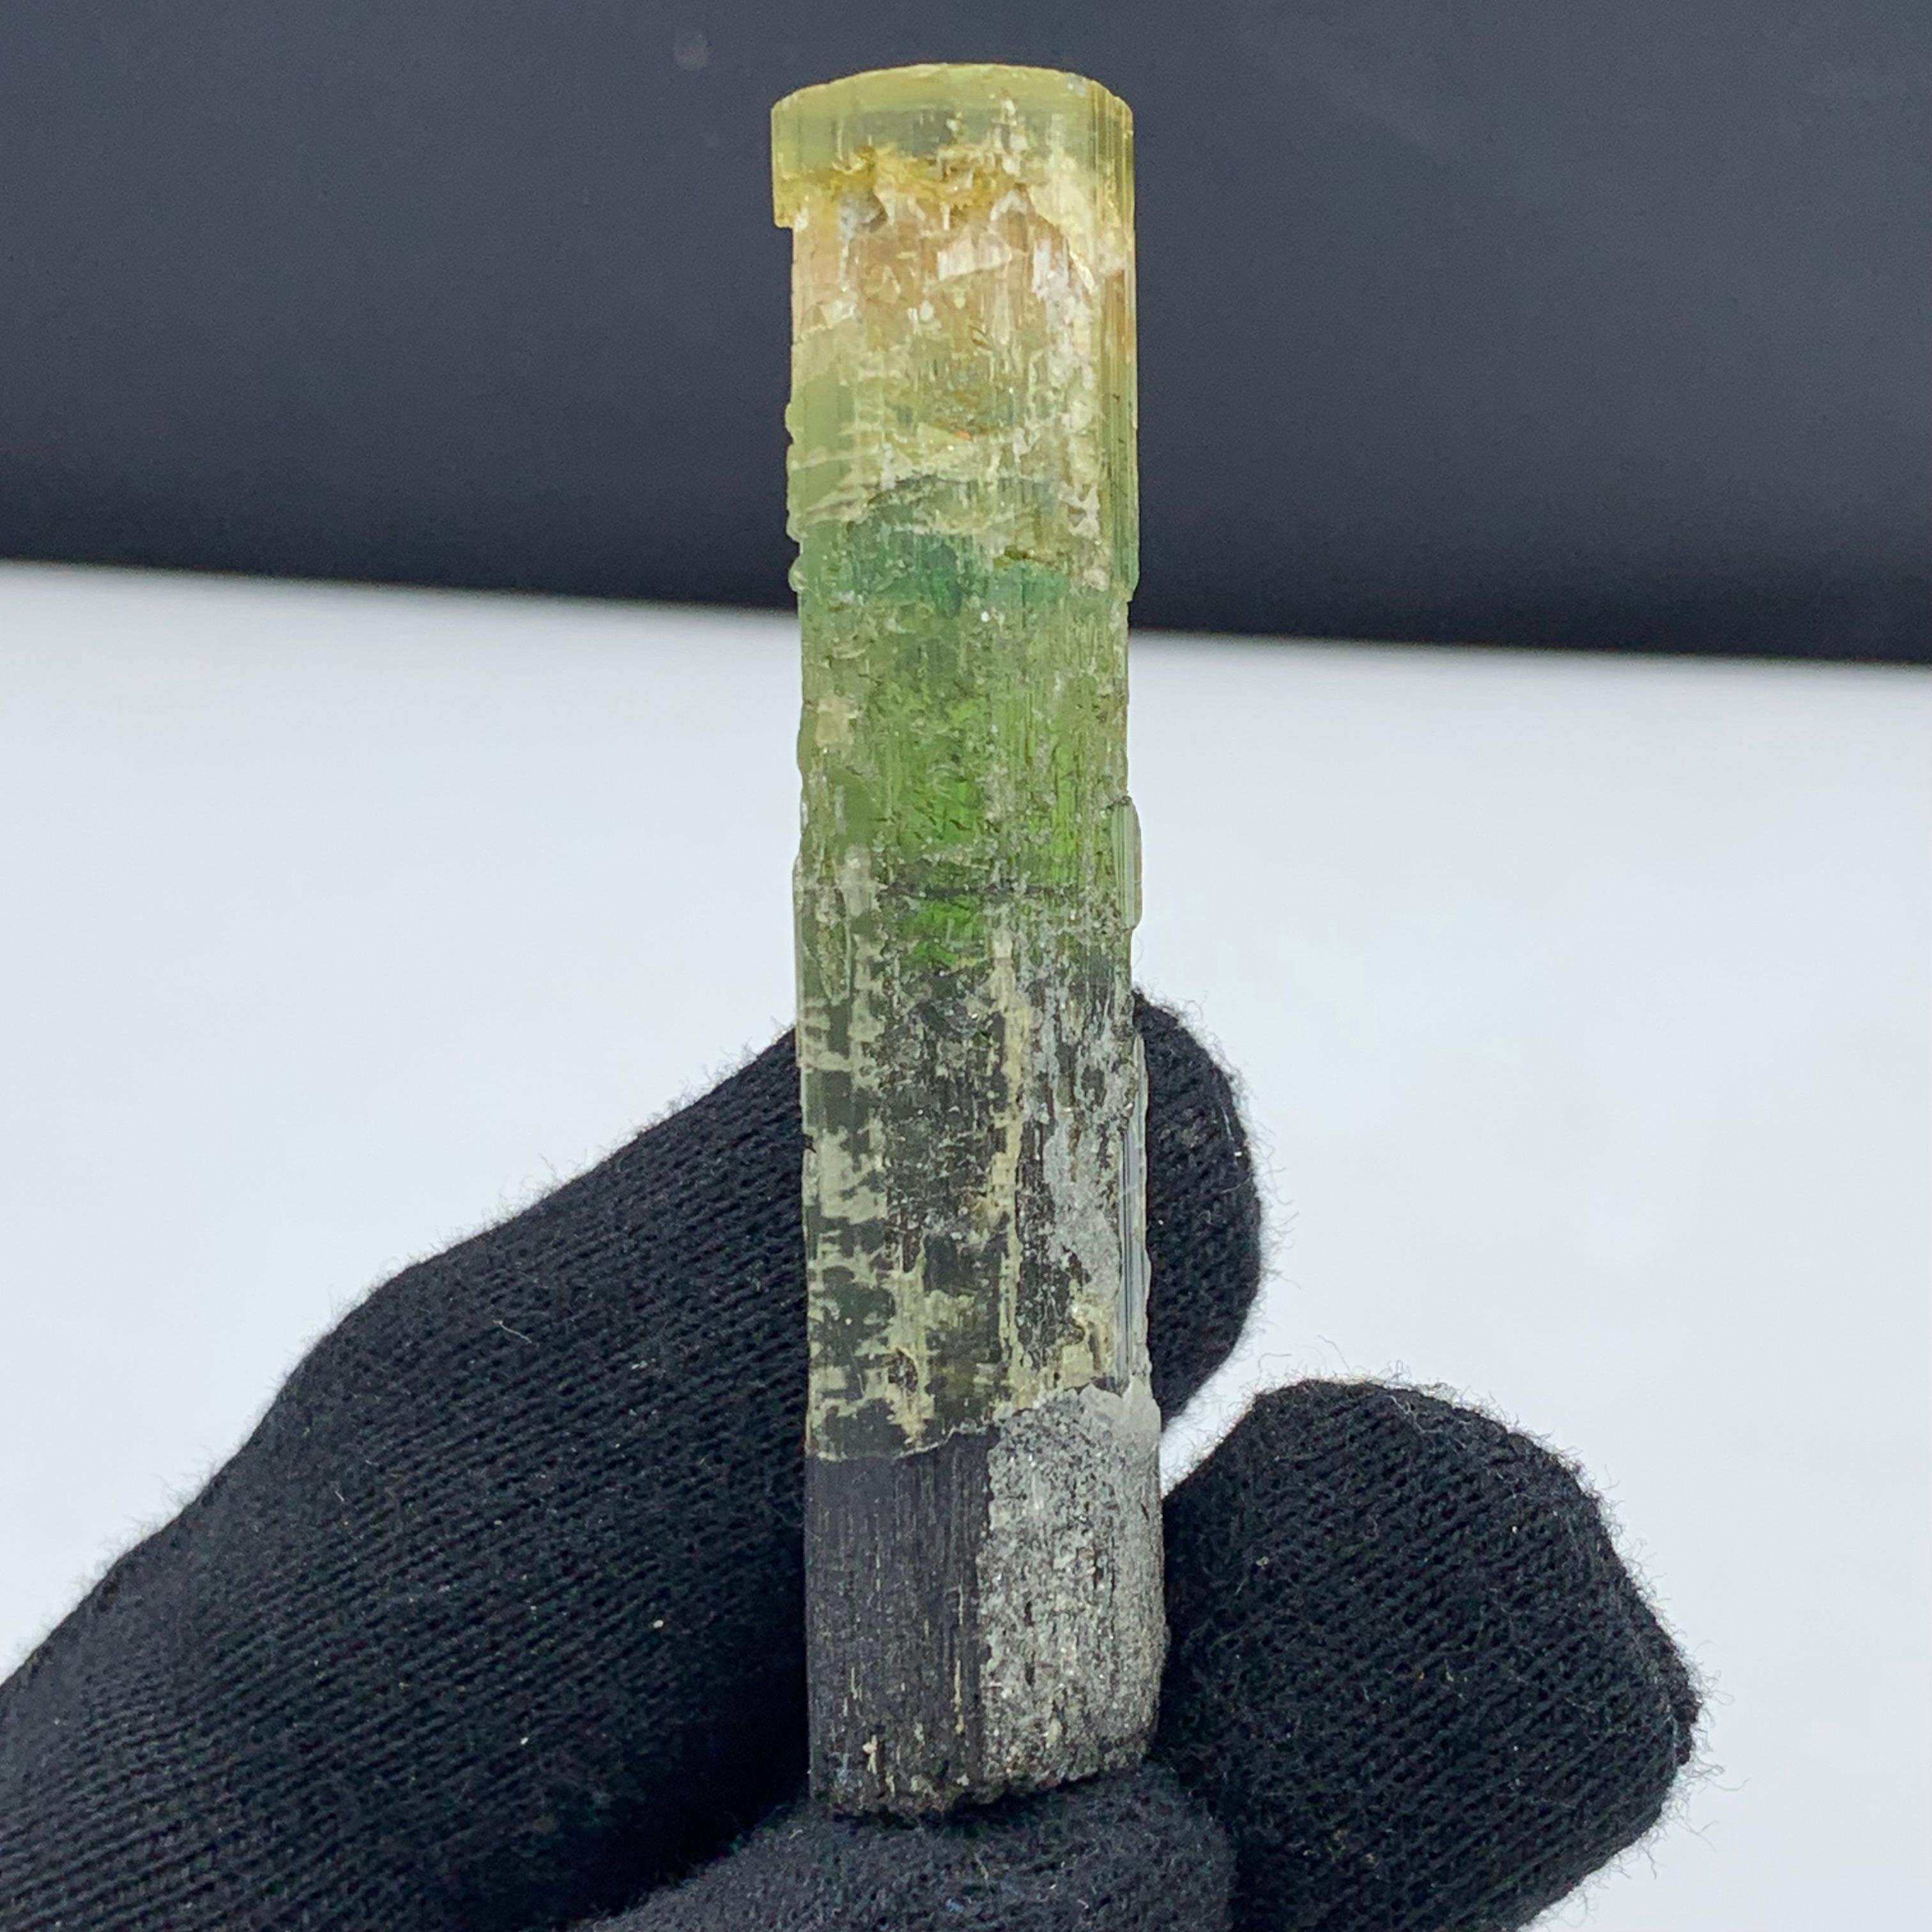 22.94 Gram Pretty Tri Color Tourmaline Crystal From Paprook, Afghanistan

Weight: 22.94 Gram
Dimension: 6.6 x 1.4 x 1.2 Cm
Origin: Paprook, Afghanistan

Tourmaline is a crystalline silicate mineral group in which boron is compounded with elements